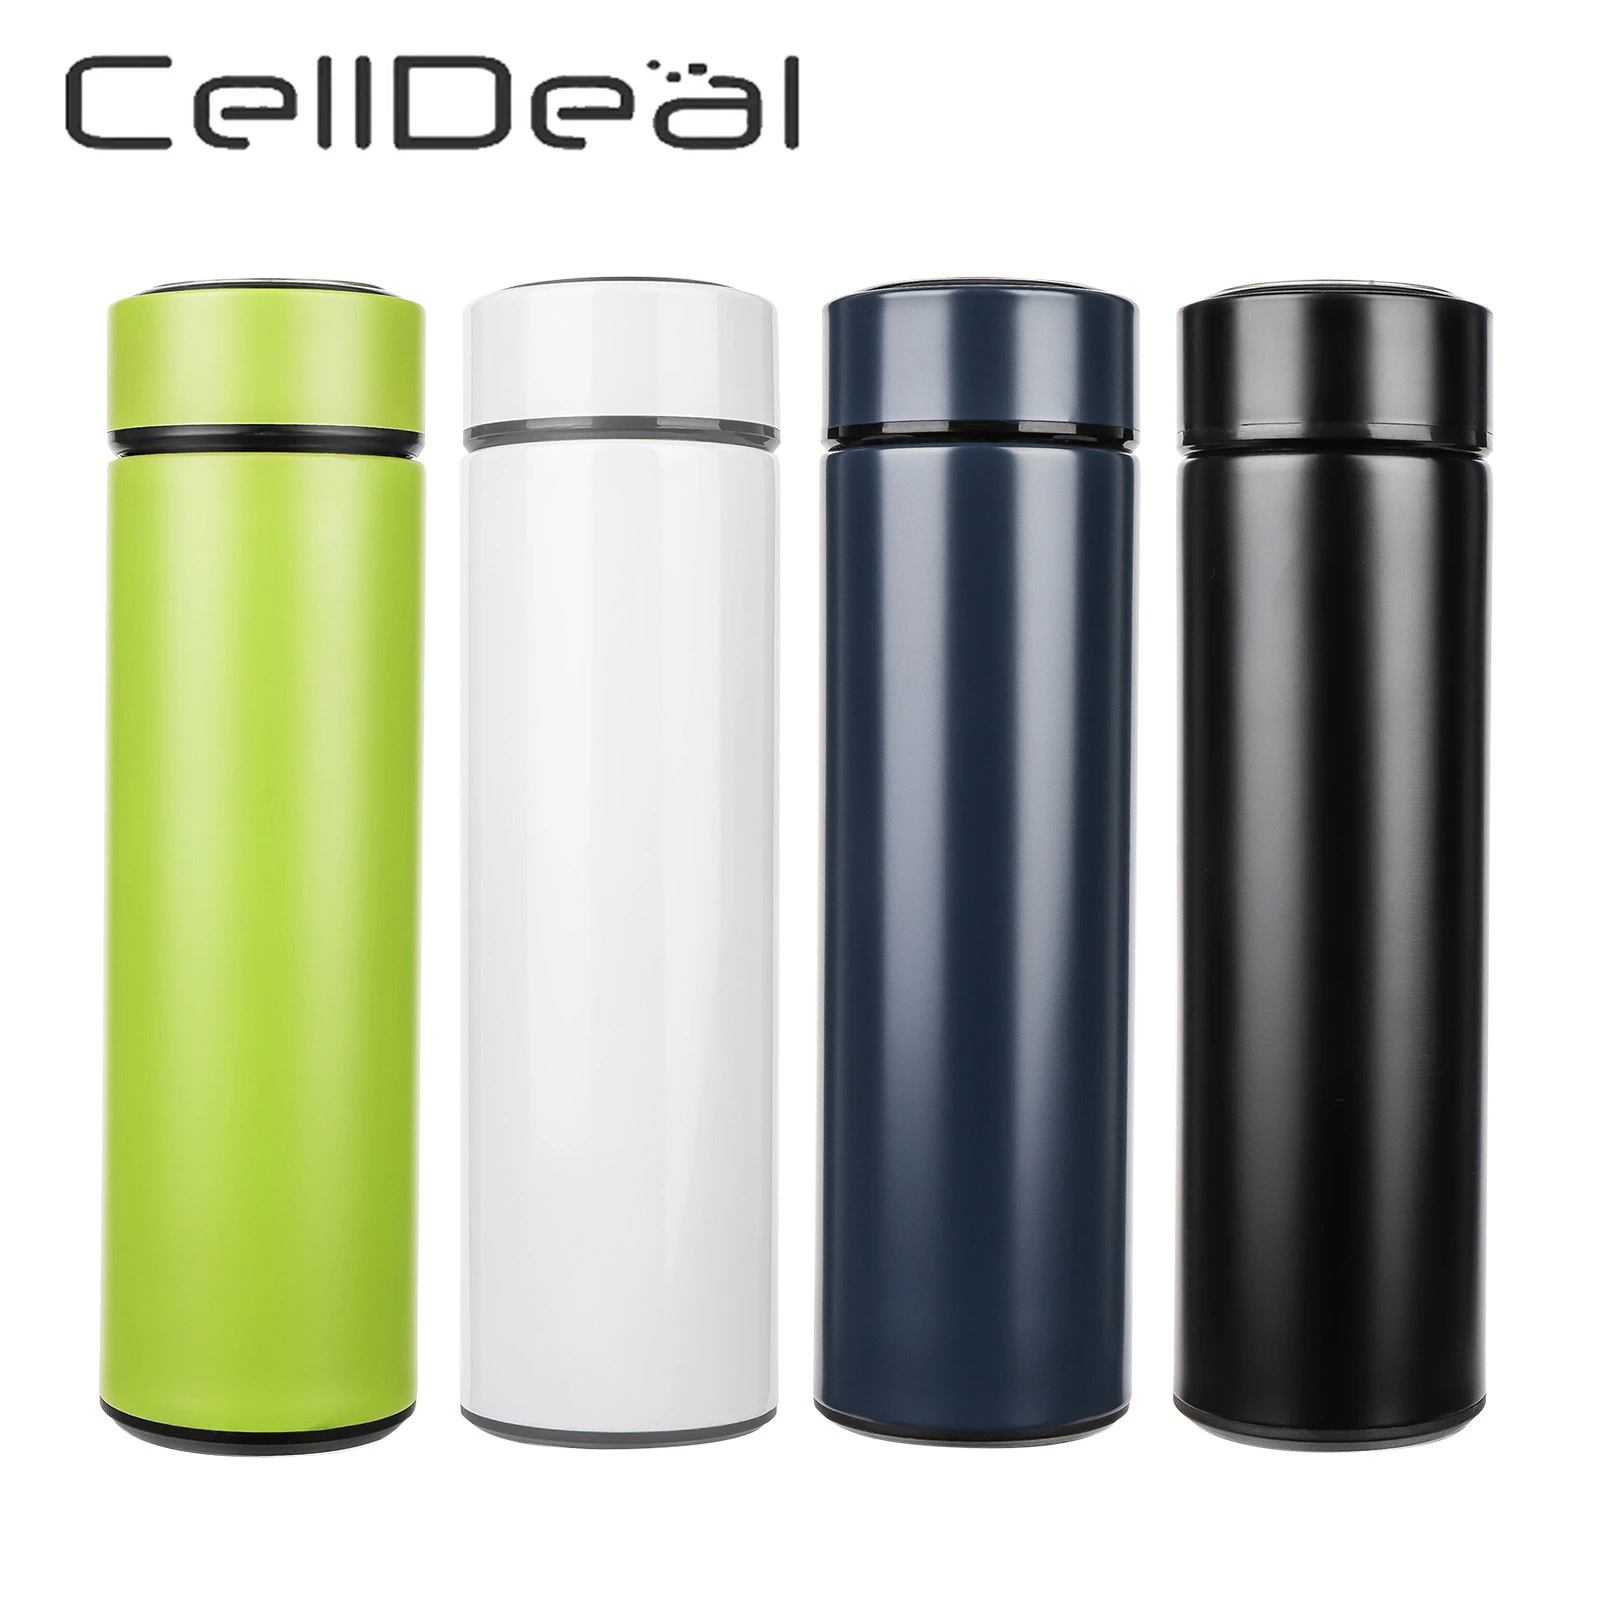 https://ae01.alicdn.com/kf/H88980290ed324e70a8cc6463f9c8fa7cL/500ML-Thermos-Cup-With-Filter-Vacuum-Flask-304-Stainless-Steel-Portable-Car-Insulated-Bottle-Travel-Thermal.jpg_Q90.jpg_.webp